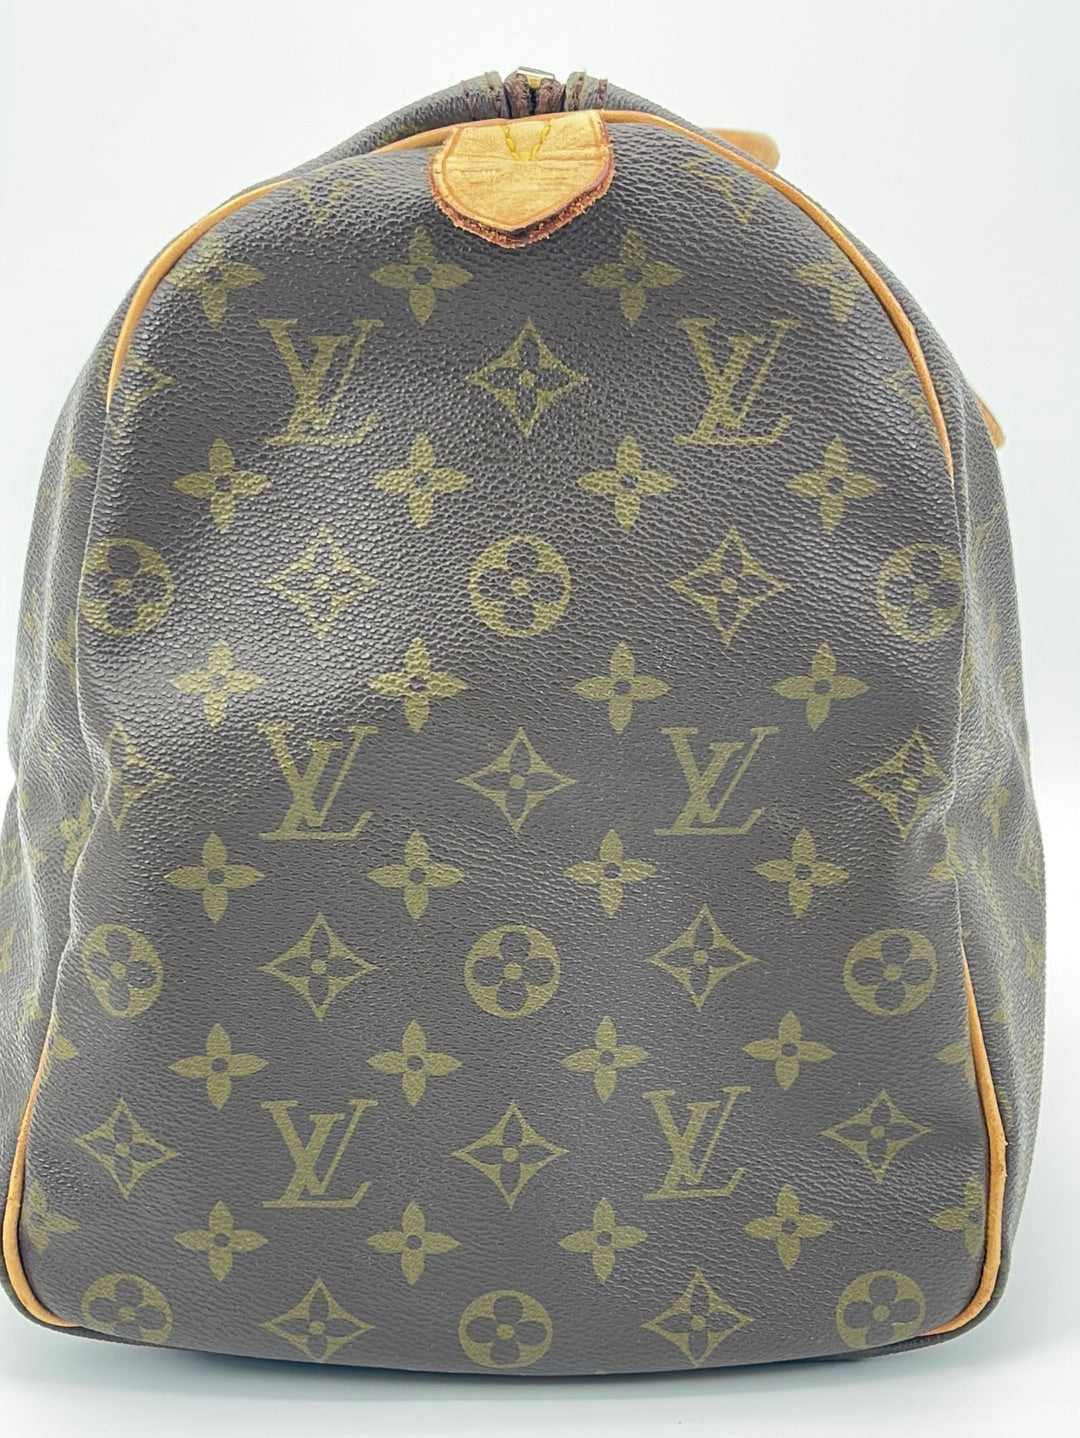 Louis Vuitton Keepall Duffle 45 Boston 870585 Epi Leather Weekend/Travel  Bag For Sale at 1stDibs